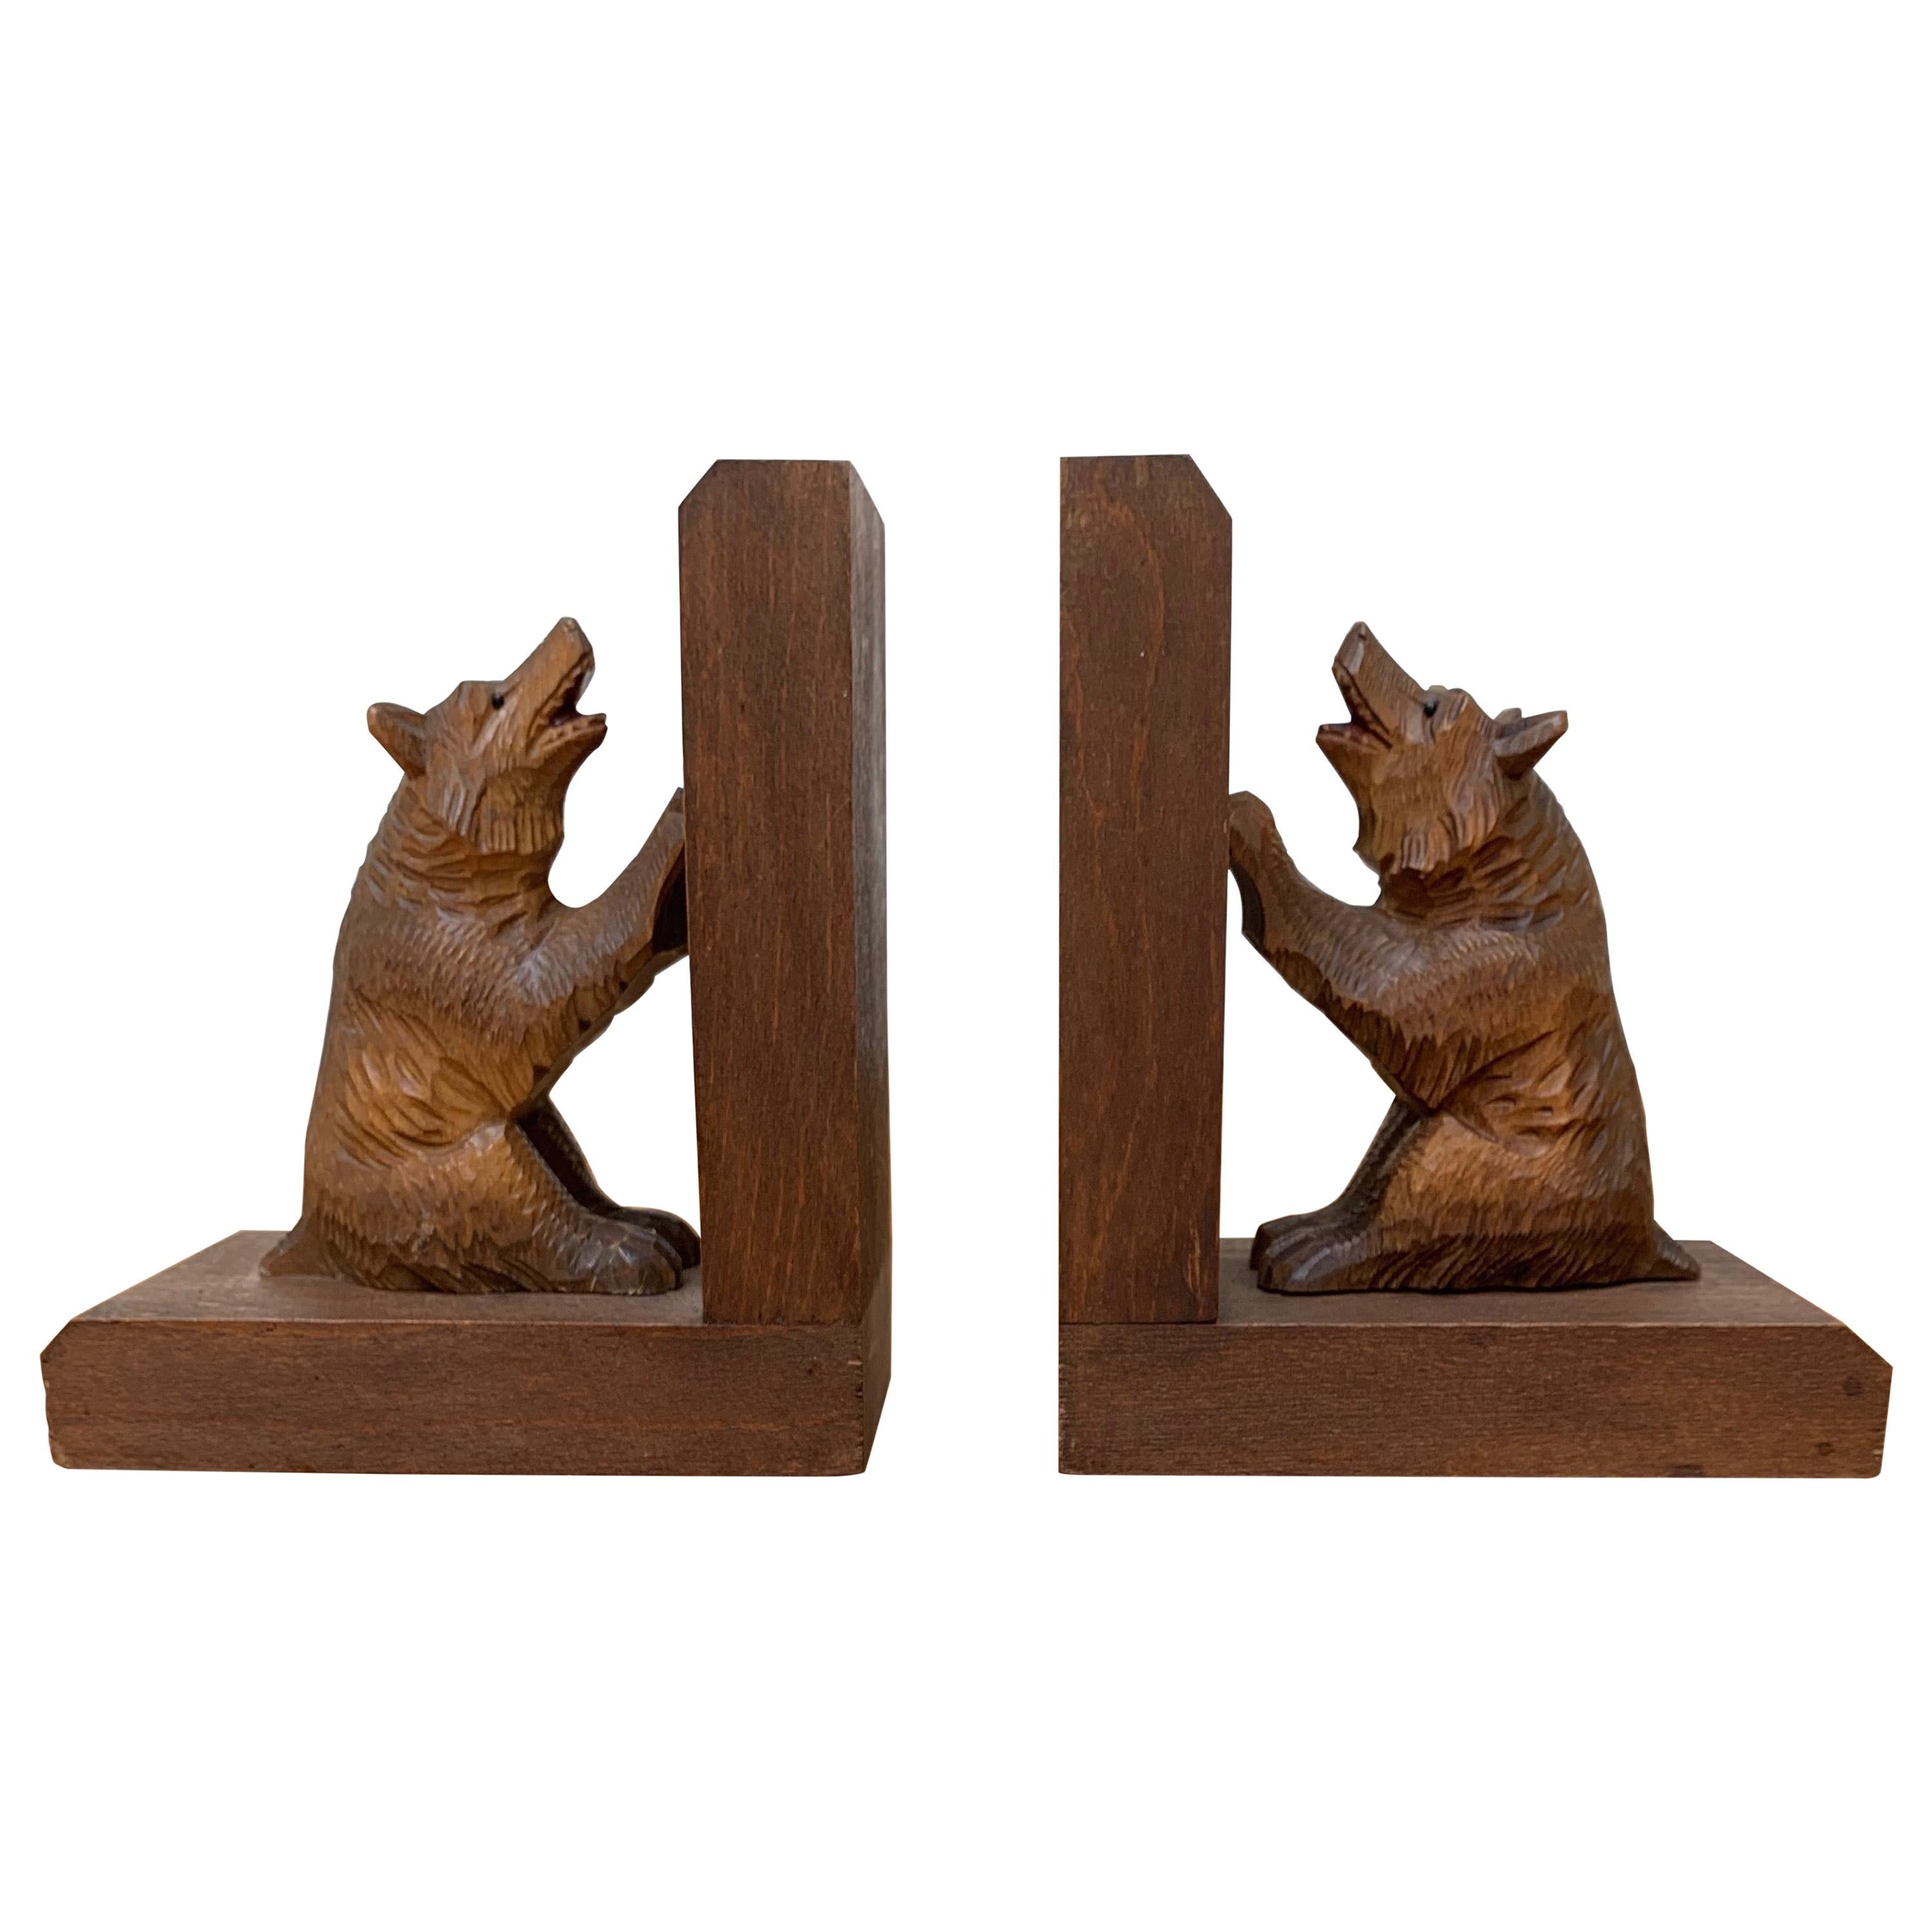 Early 20th Century Art Deco Era Bookends with Hand Carved Bear Sculptures